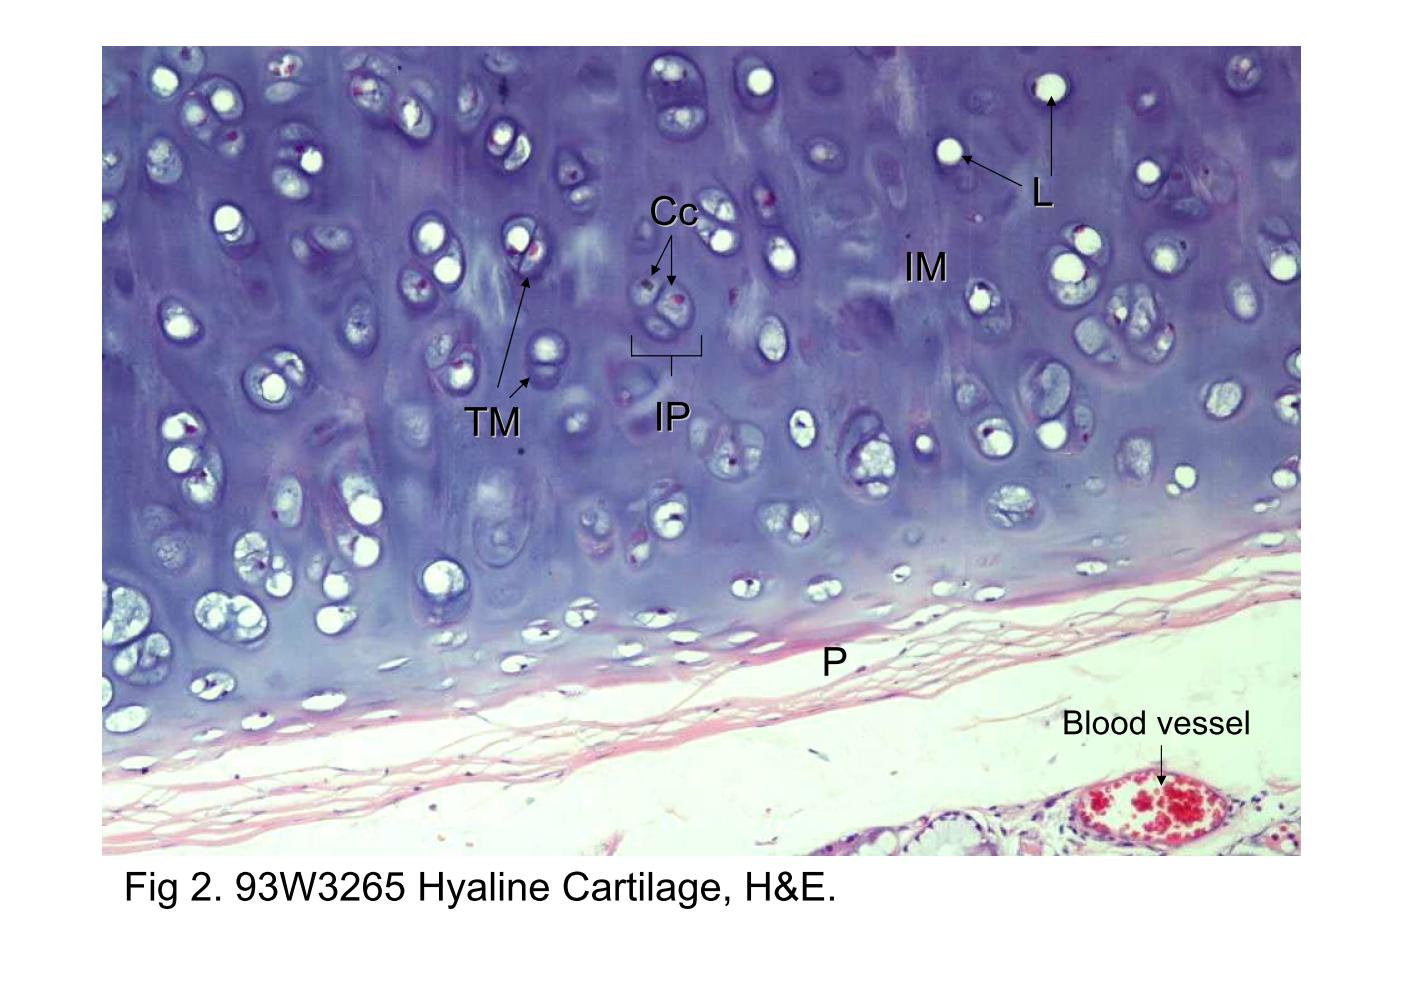 block6-1_07.jpg - Fig 2. 93W3265 Hyaline Cartilage, H&E.This figure shows a higher-magnification micrograph of a hyalinecartilage with its perichondrium (P). The cartilage appears as anavascular expanse of matrix material and a population of cellscalled chondrocytes (Cc). The chondrocytes produce the matrix;the space each chondrocyte occupies is called a lacuna (L).Hyaline cartilage is surrounded by a thin layer of denseconnective tissue, the perichondrium. The perichondrium servesas a source of new chondrocytes during appositional growth ofthe cartilage. Chondrocytes also undergo interstitial growth inlacunae and form isogenous groups (IP). The chondrocytesproduce the cartilage matrix that shows the dark-staining capsuleor territorial matrix (TM) immediately surrounding the lacunae.The interterritorial matrix (IM) is more removed from theimmediate vicinity of chondrocytes and is less intensely stained.